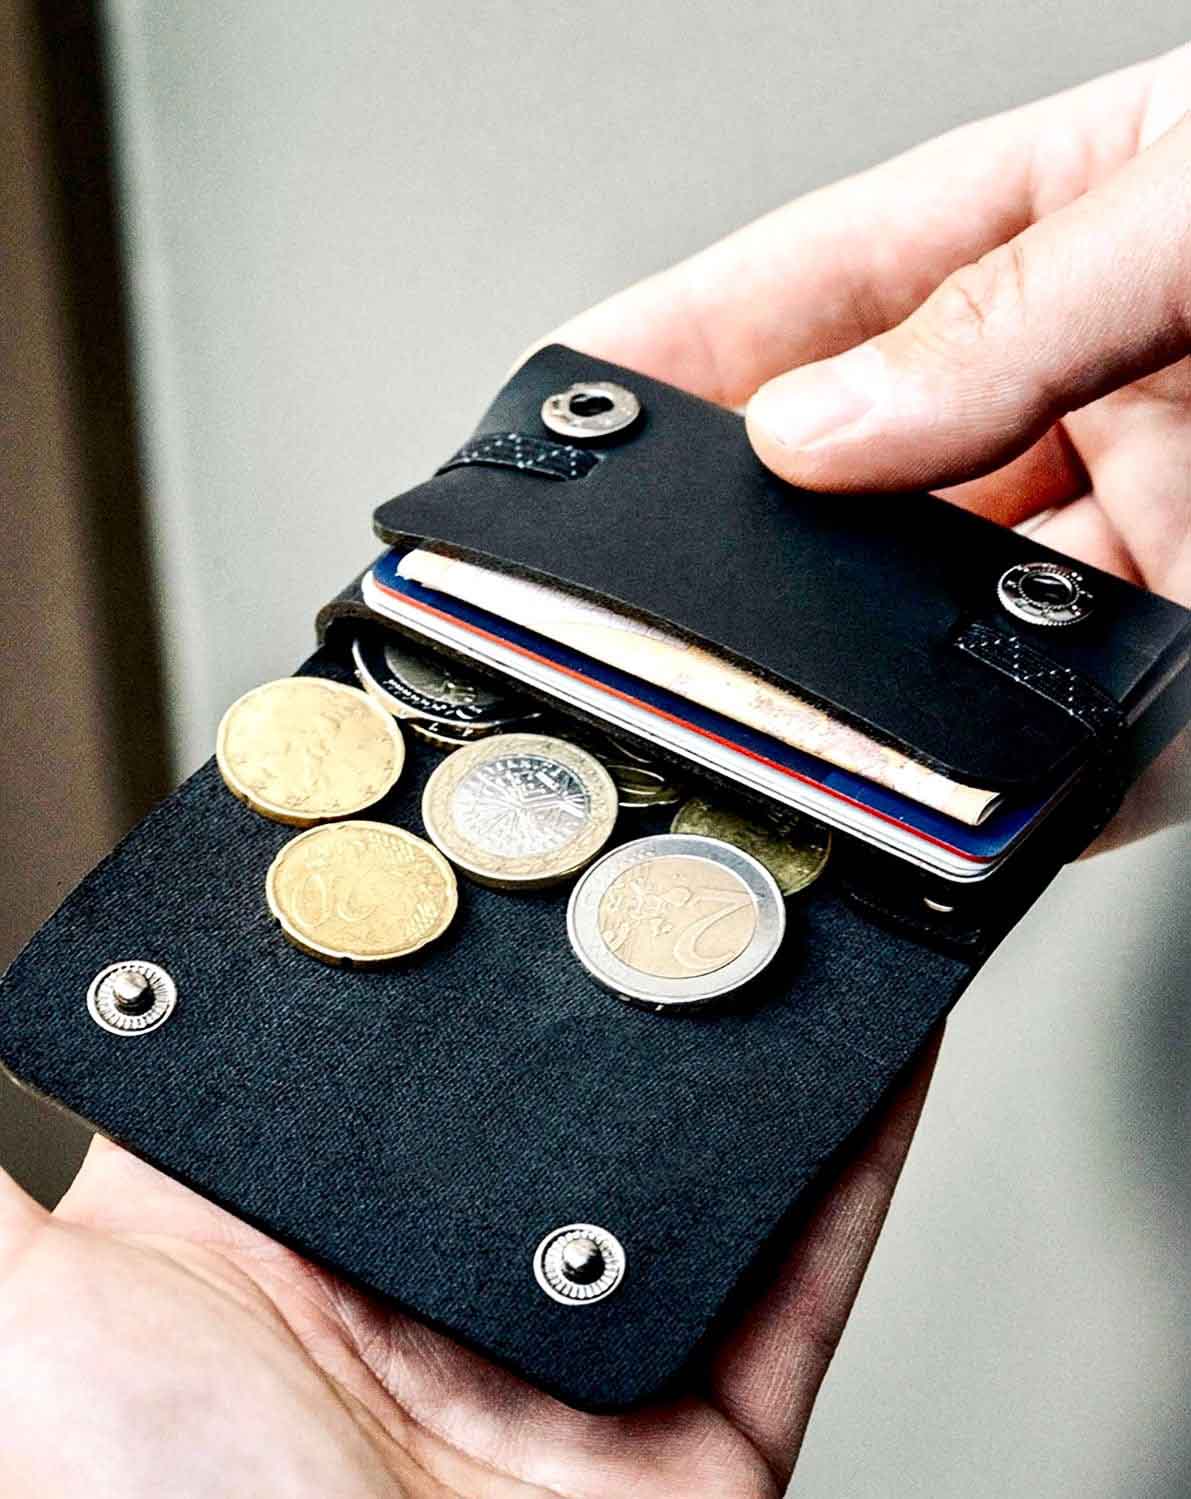 Wallet for many Coins, Cards and Bills "Coin Wallet 2.0"